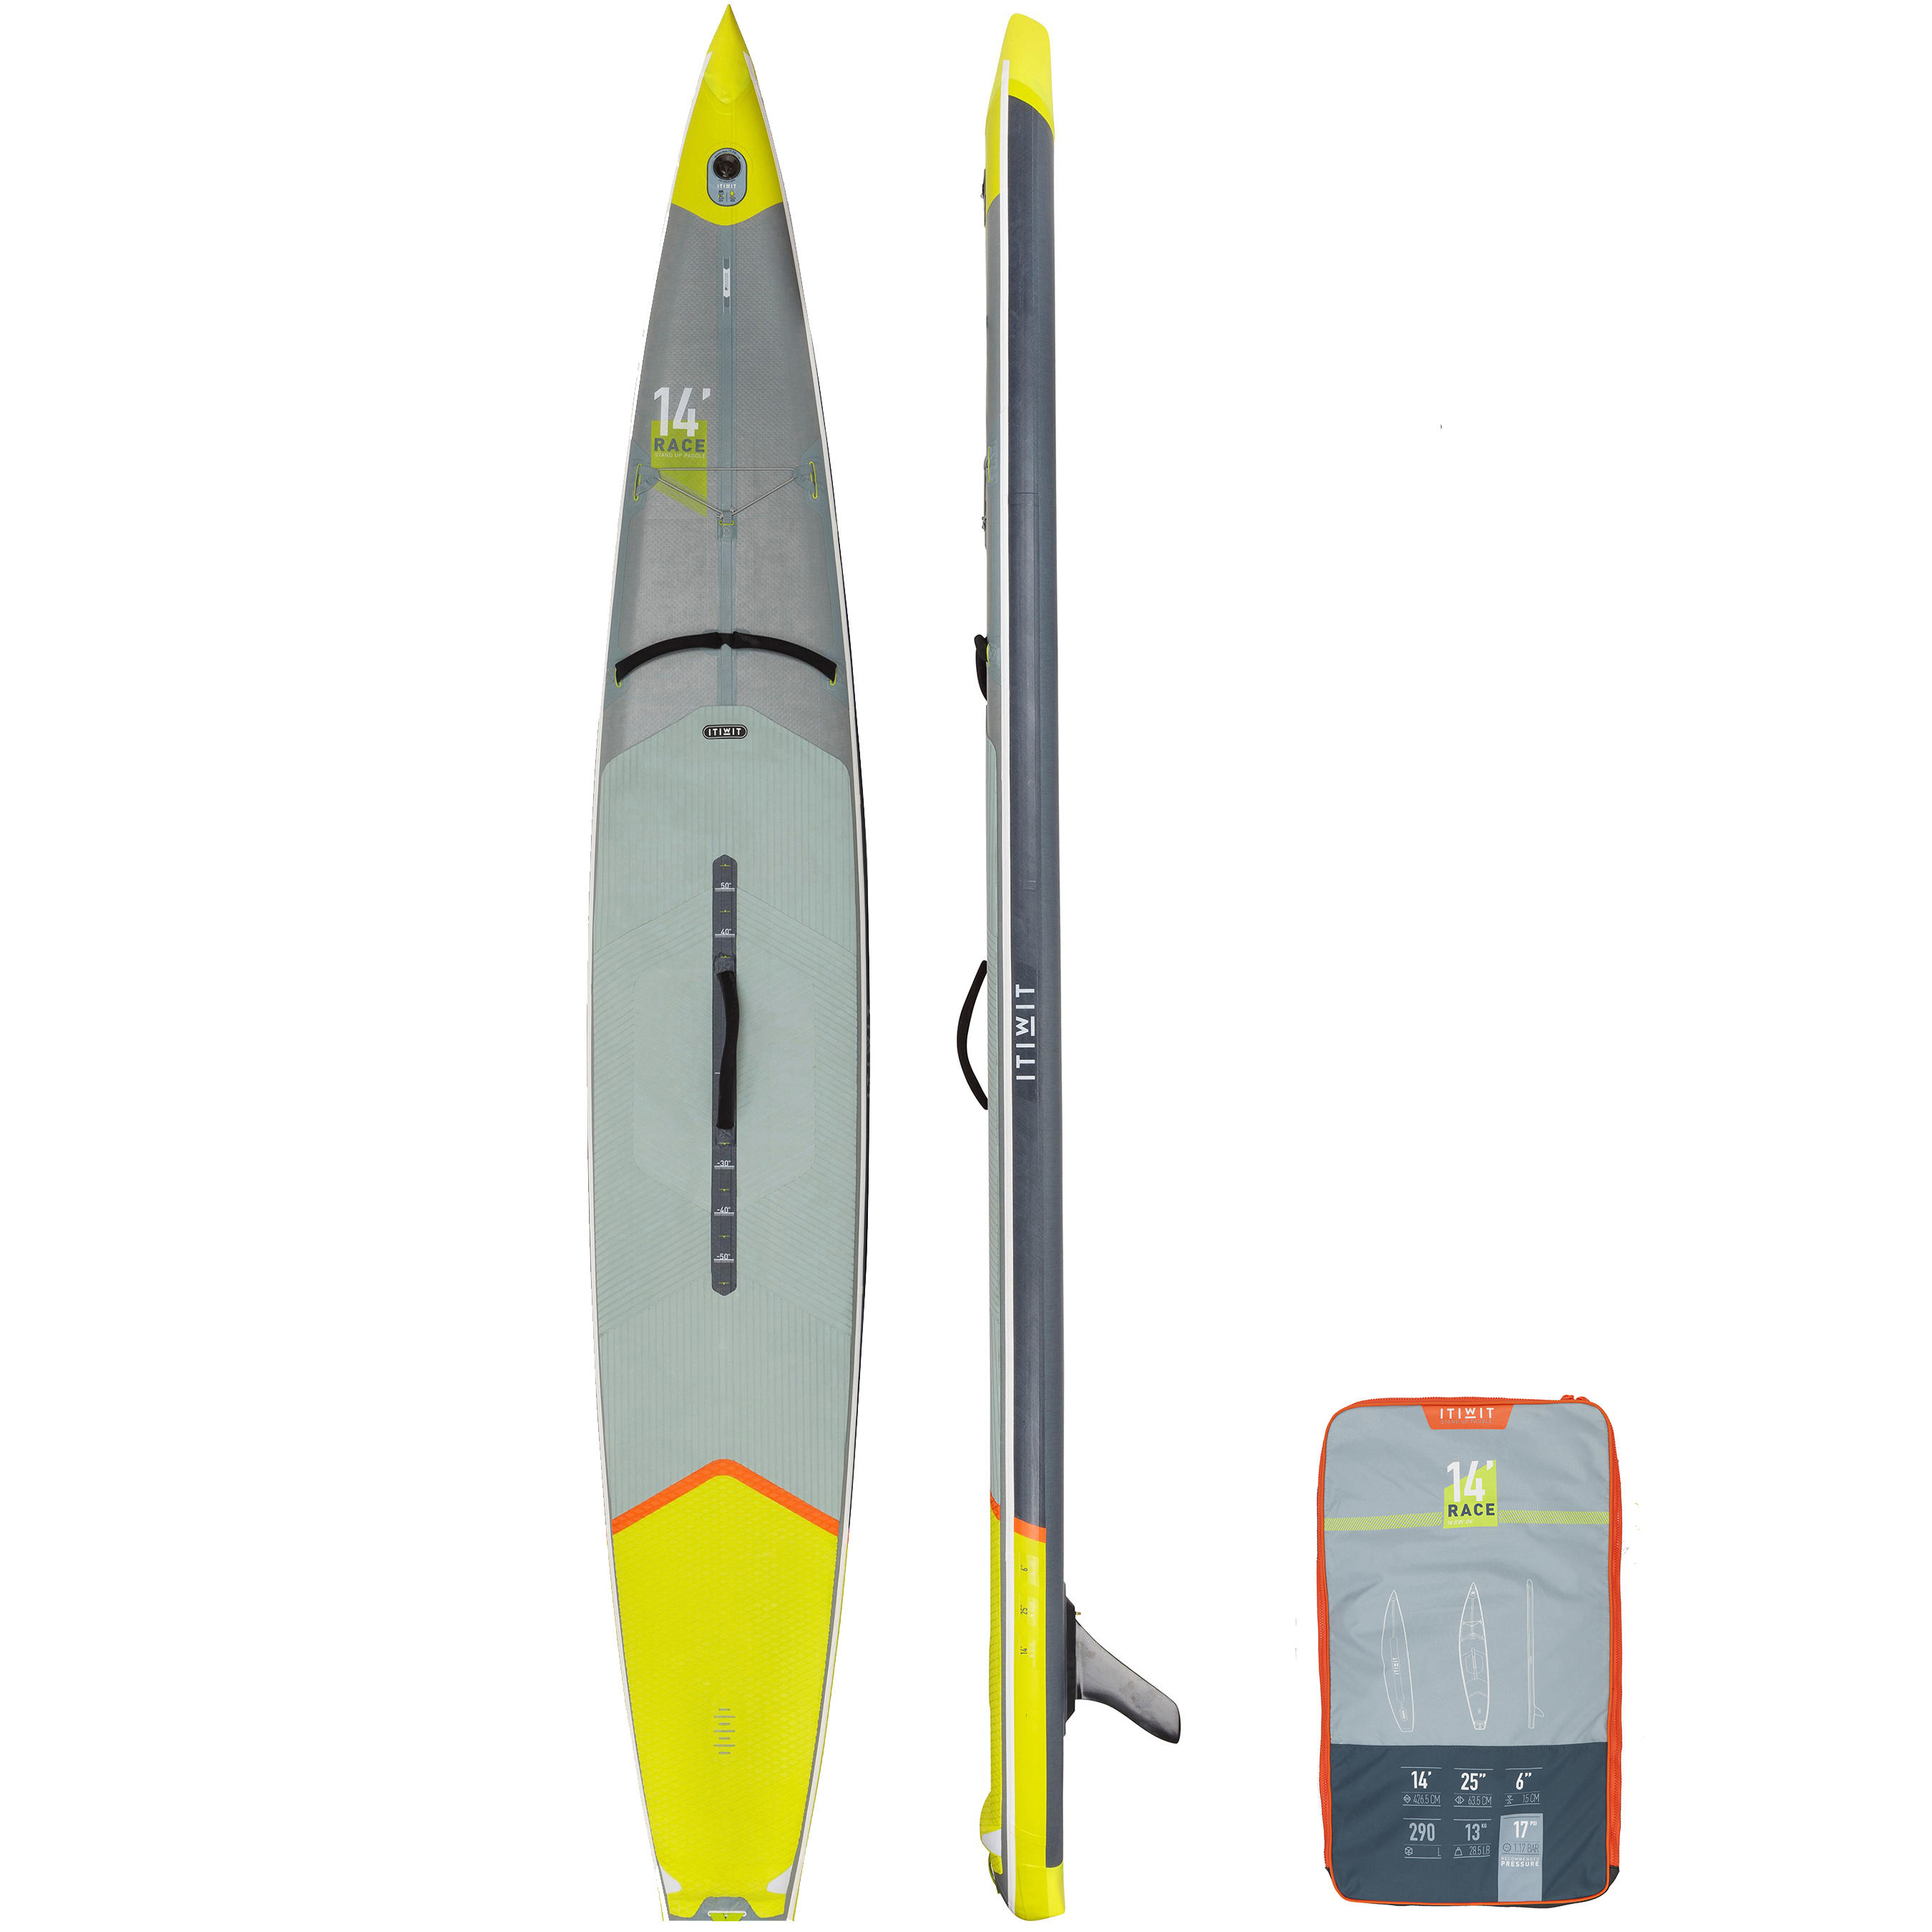 Racing Inflatable Stand-Up Paddleboard _PIPE_ Intermediate Race 14 Feet 25 Inches - No Size By ITIWIT | Decathlon